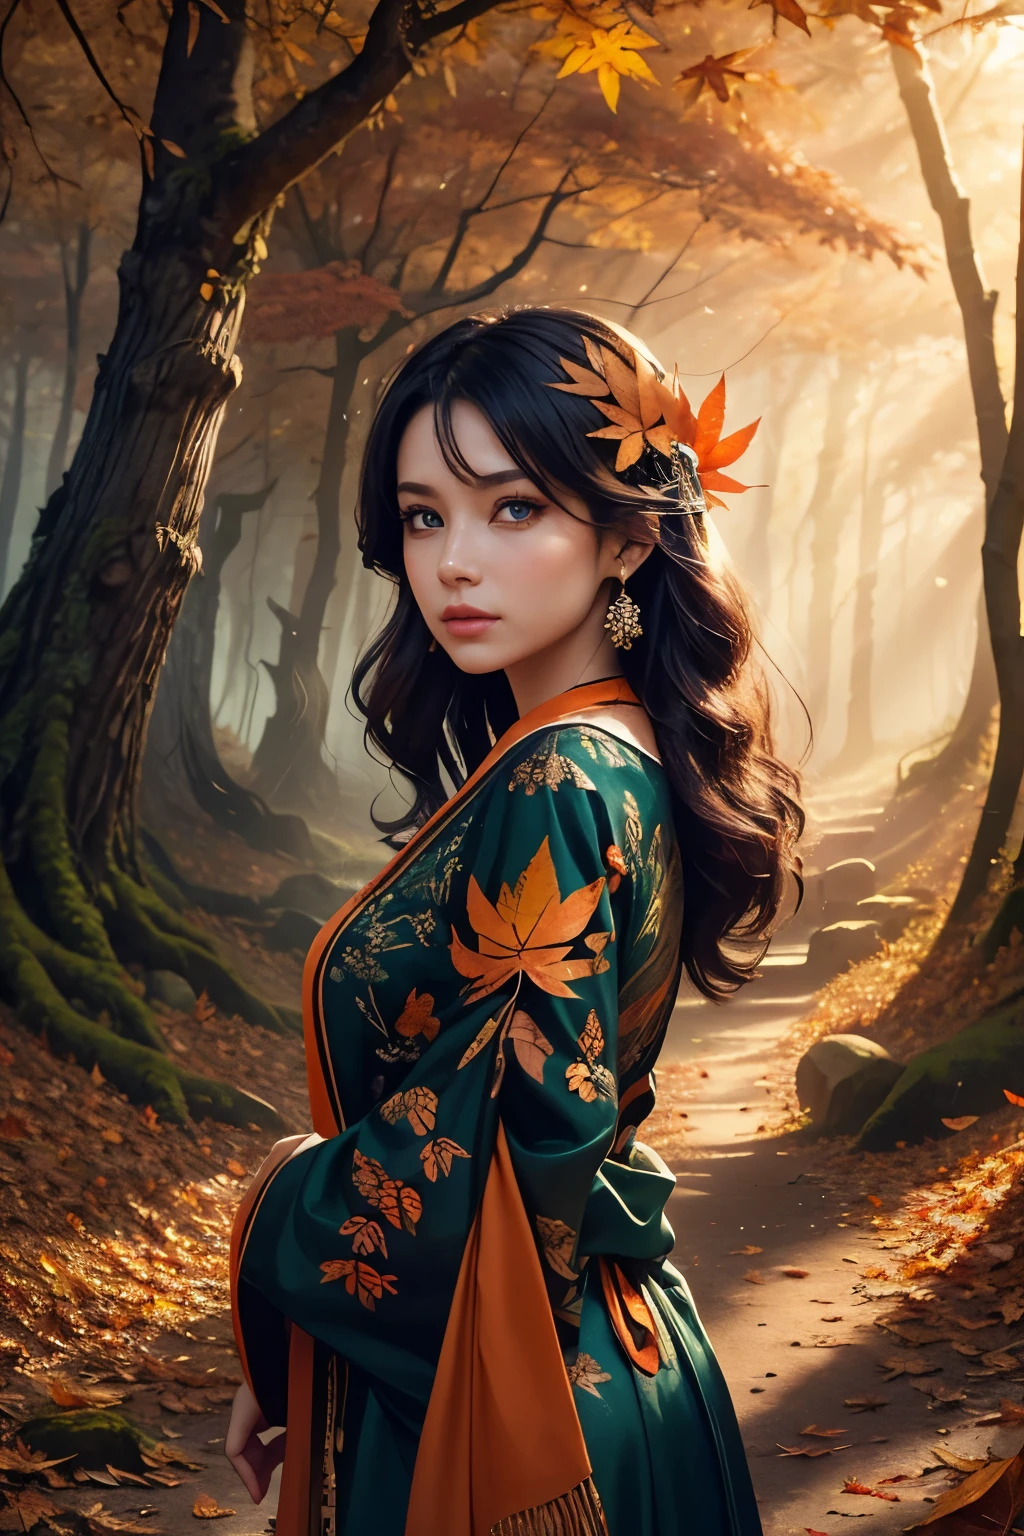 This is a (((highly detailed))) and (((hires))) fantasy image with (((many woodland elements))) and ((many colors)). Generate one interesting woman. The woman has striking eyes and beautiful eyes and ((colorful eyes)), with many colors and interesting patterns. Her clothing is soft and ornate, with flowing silks and sparkling gems. The woman is a (woodland faerie) standing in the midst of an autumn forest with hazy sunlight and (((many realistic red and orange leaves))) falling. The forest is thick with beautiful trees and rays of sunlight or moonlight. Include fall leaves in the air, wind, and chilly weather. Use dynamic composition and lighting to create a (compelling masterpiece). The image should be busy and chaotic with leaves swirling in the wind. Include shimmer, shimmering, fantastical details, (ultra-detailed), cheek blush, cheek flush, puffy lips, fanfo